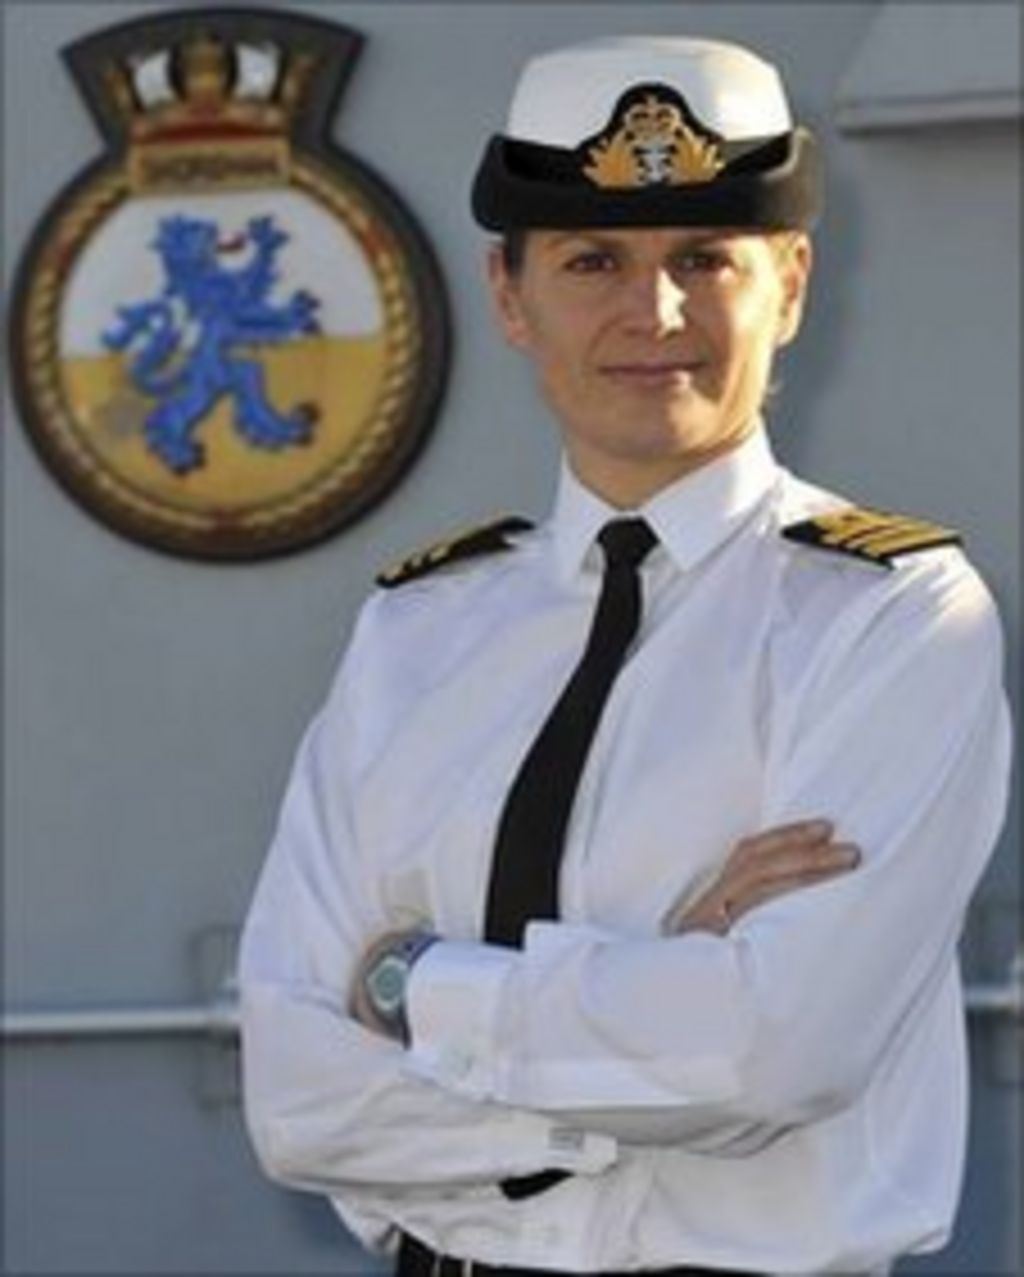 Royal Navy S First Woman Warship Commander Sarah West Takes Up Her Post Bbc News